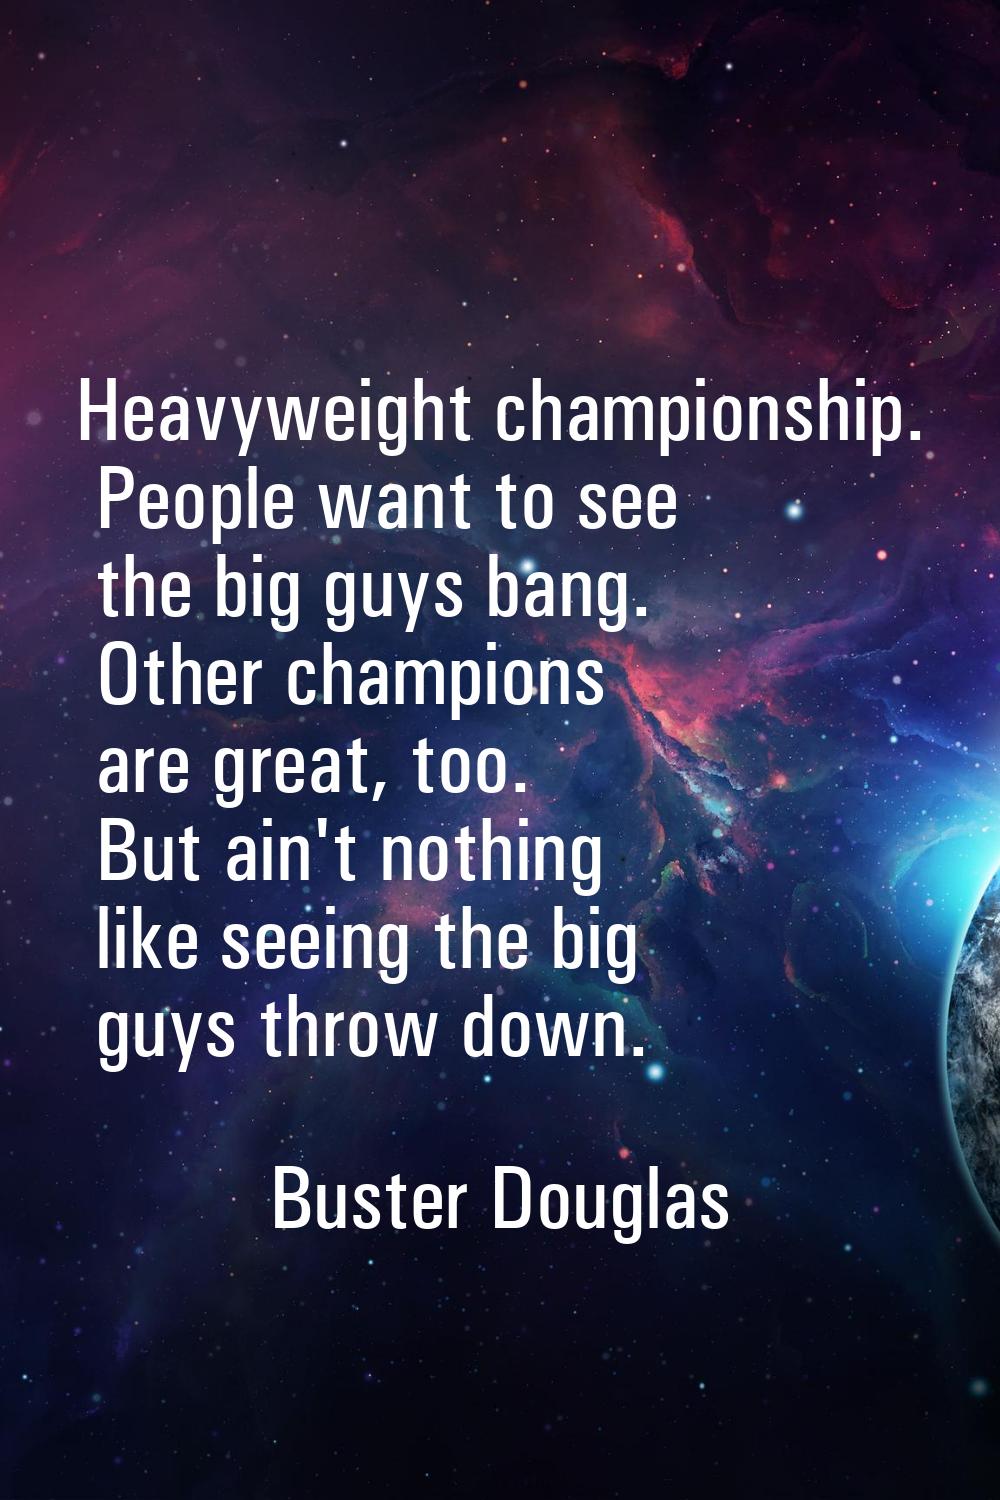 Heavyweight championship. People want to see the big guys bang. Other champions are great, too. But